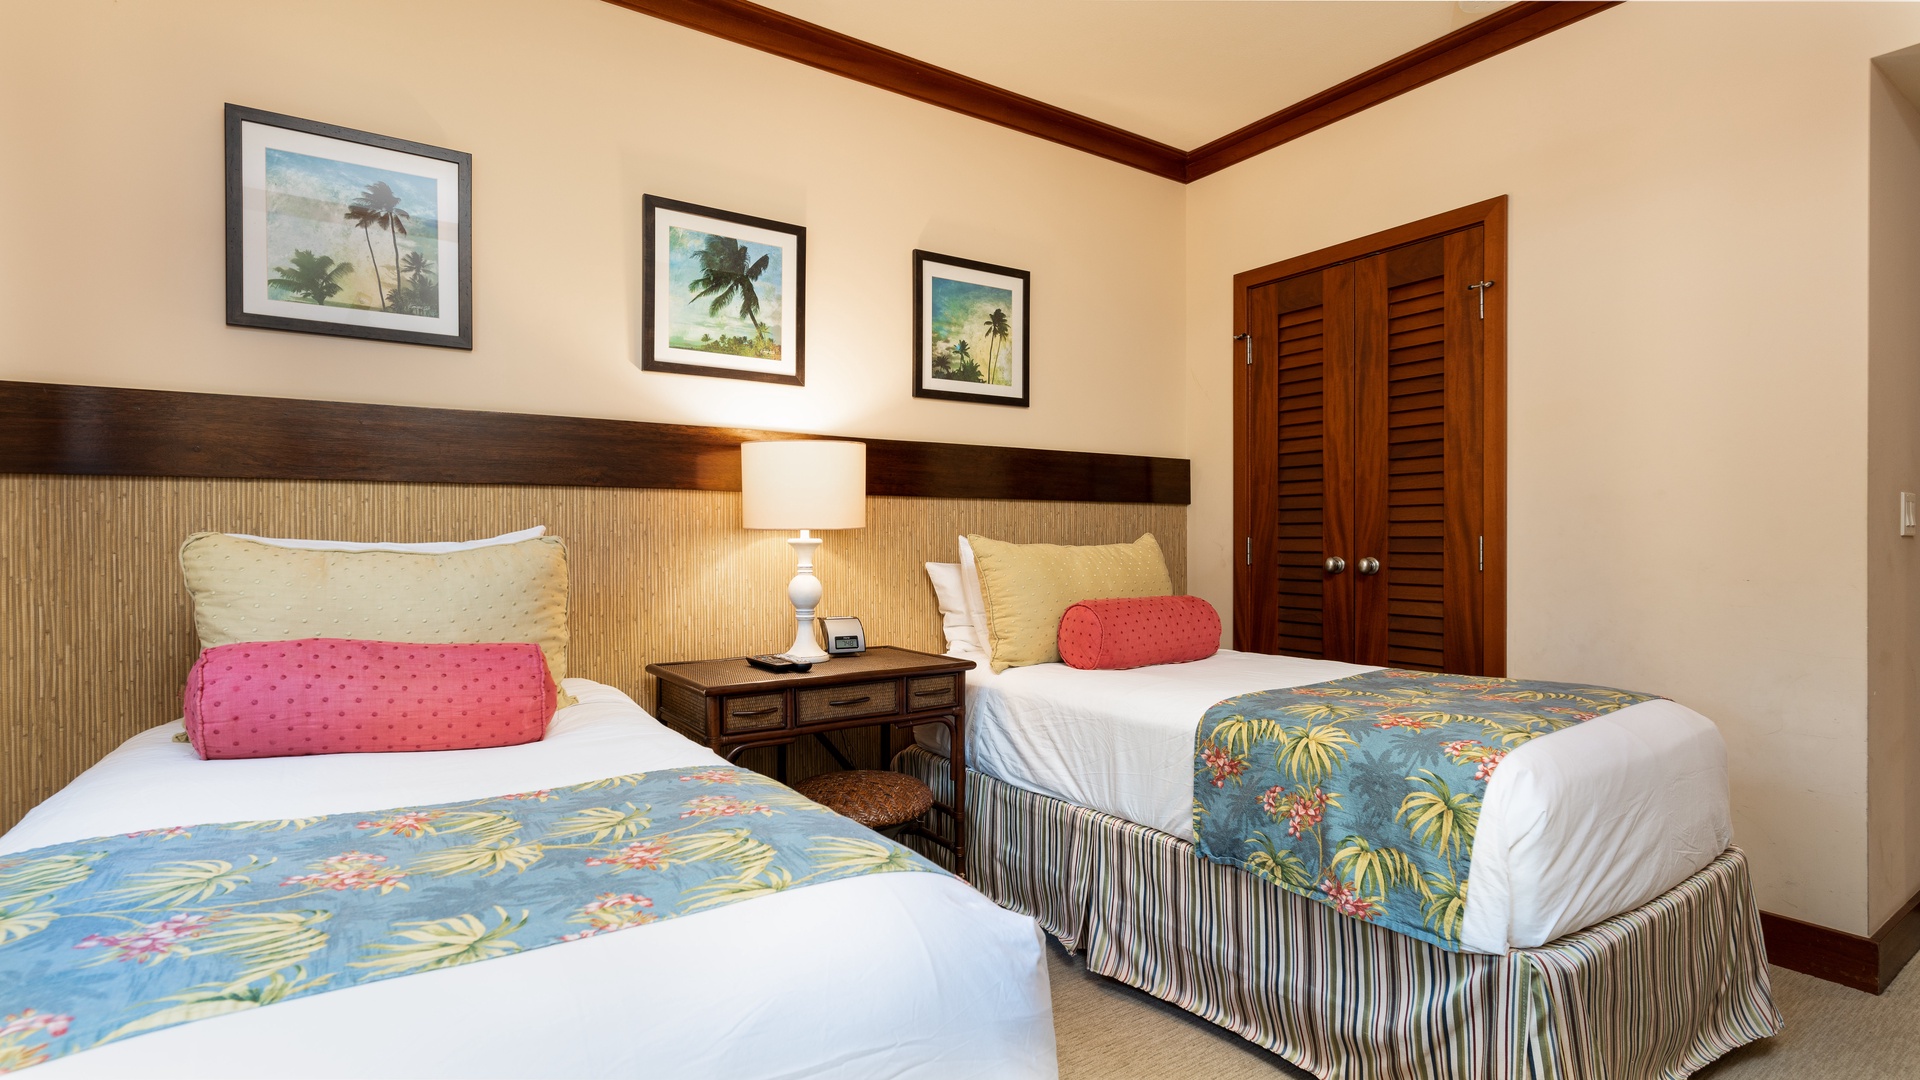 Kapolei Vacation Rentals, Ko Olina Beach Villas B202 - The second guest bedroom with delightful prints and cozy accommodations.